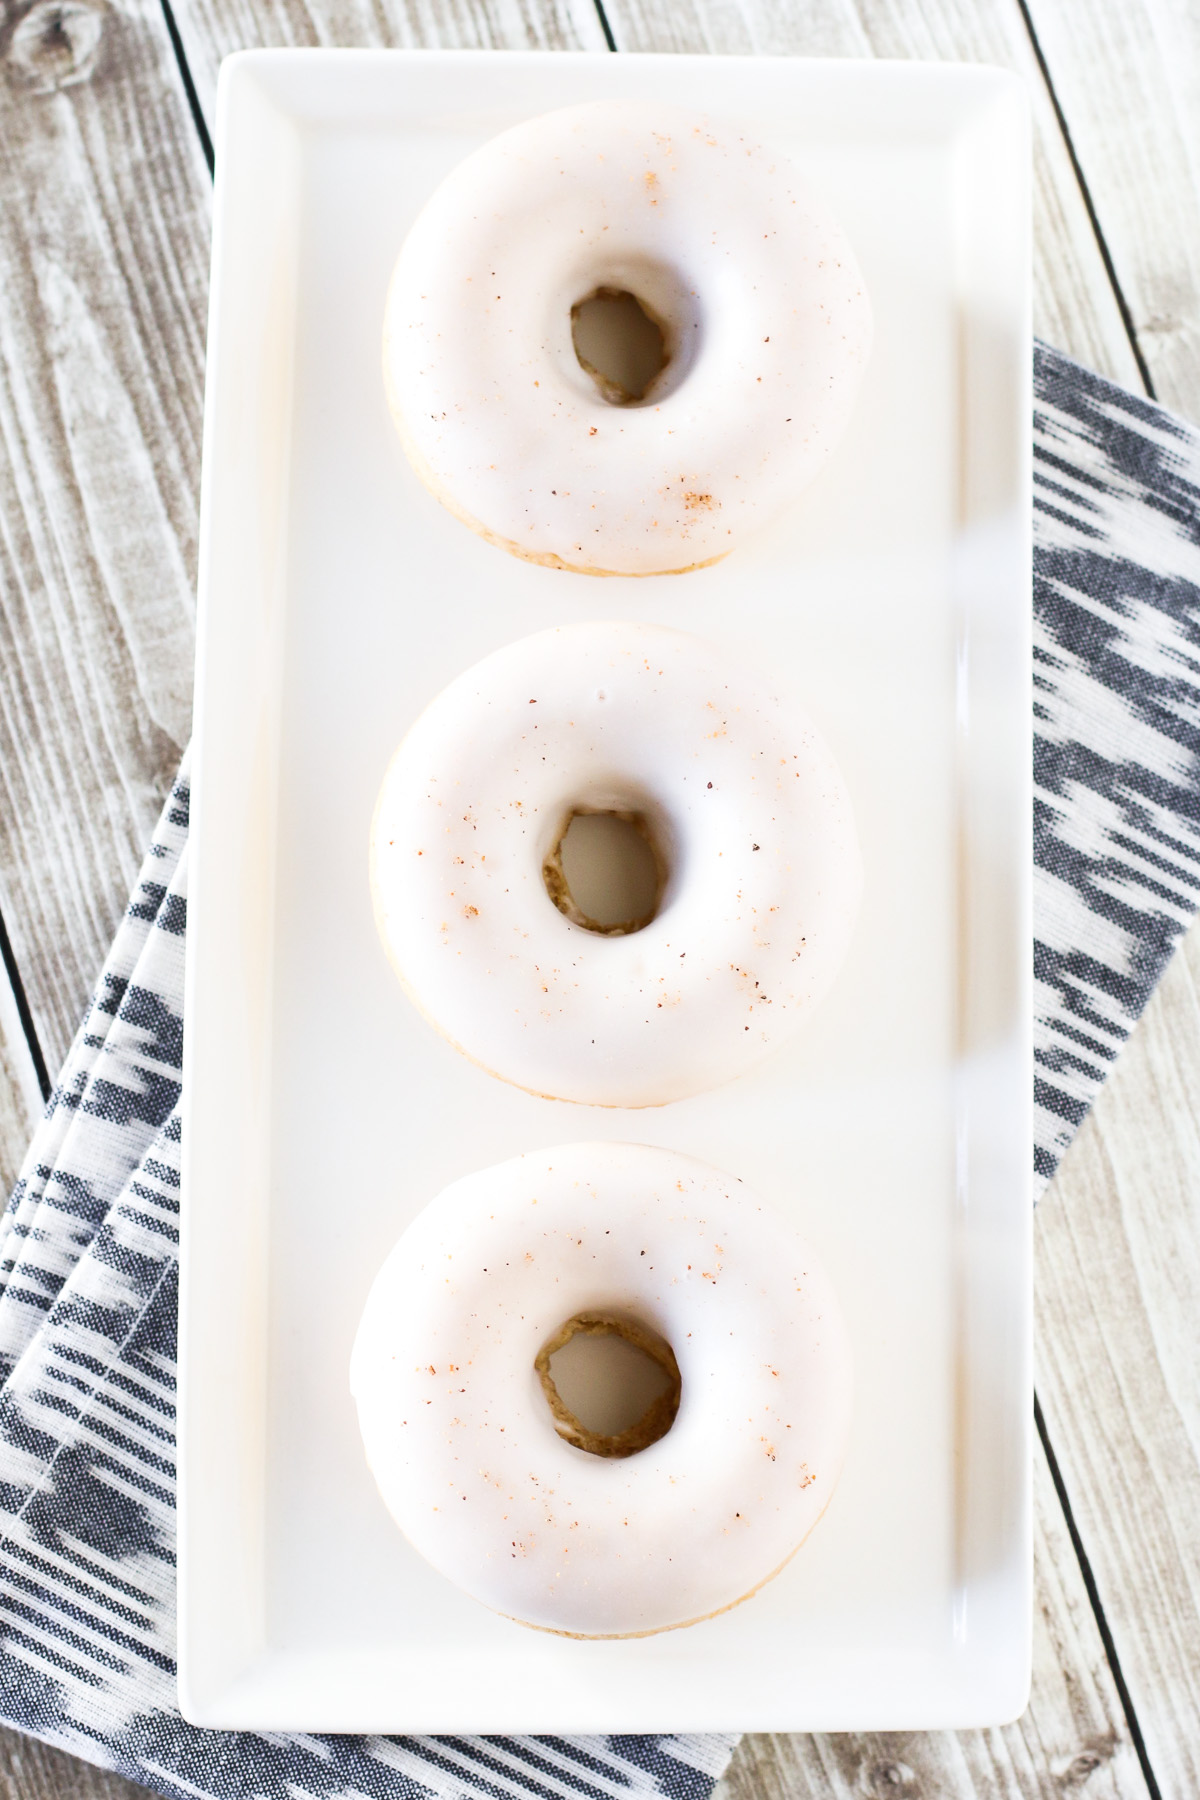 Gluten Free Vegan Baked Eggnog Donuts. Holiday flavor of creamy eggnog in these fluffy baked donuts.